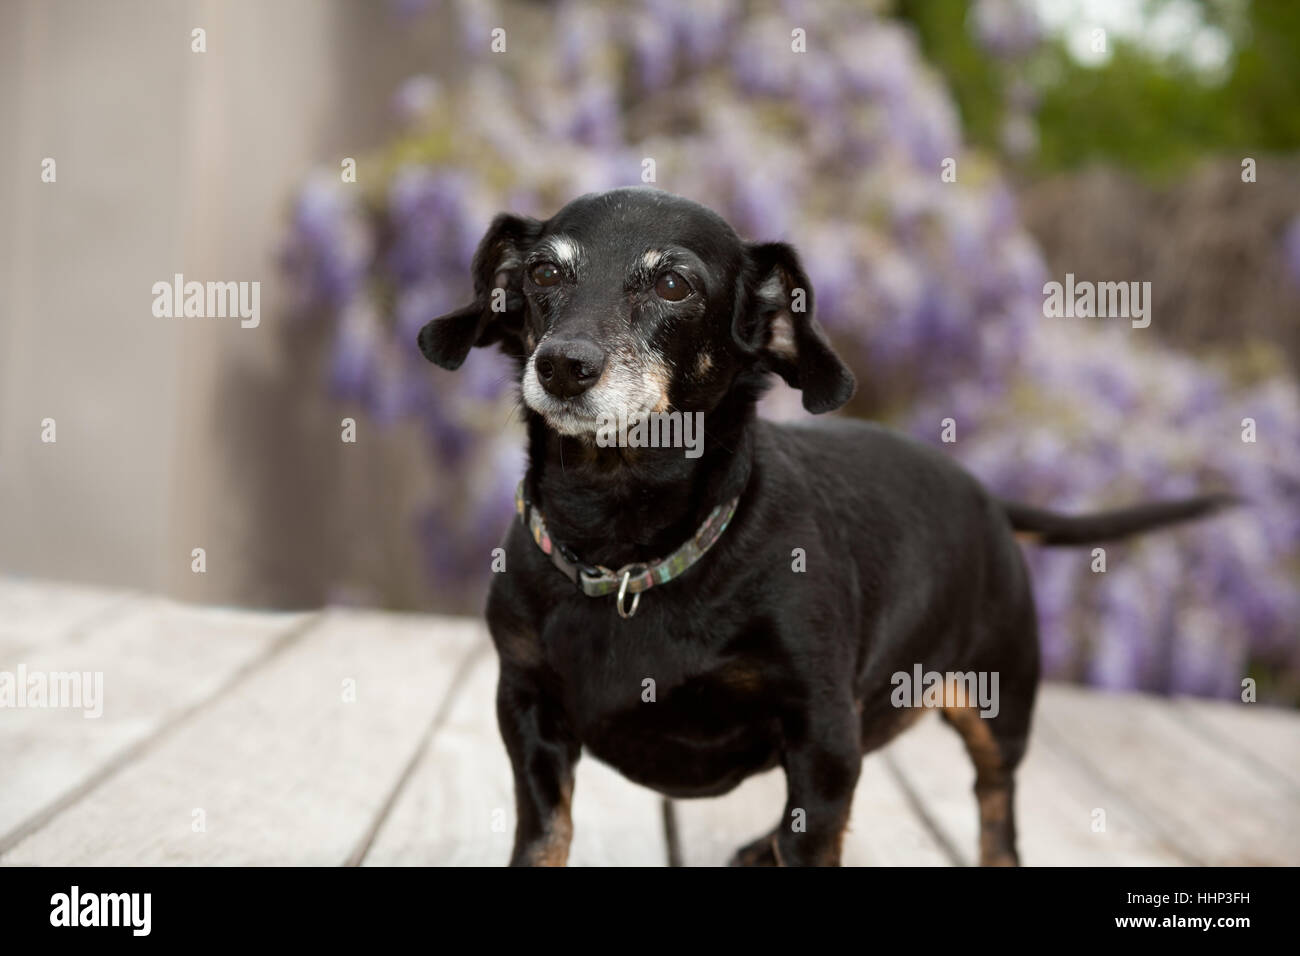 Small senior mini full body dachshund wiener dog stands on wooden deck with lavender wisteria vines blurred in the background. Stock Photo